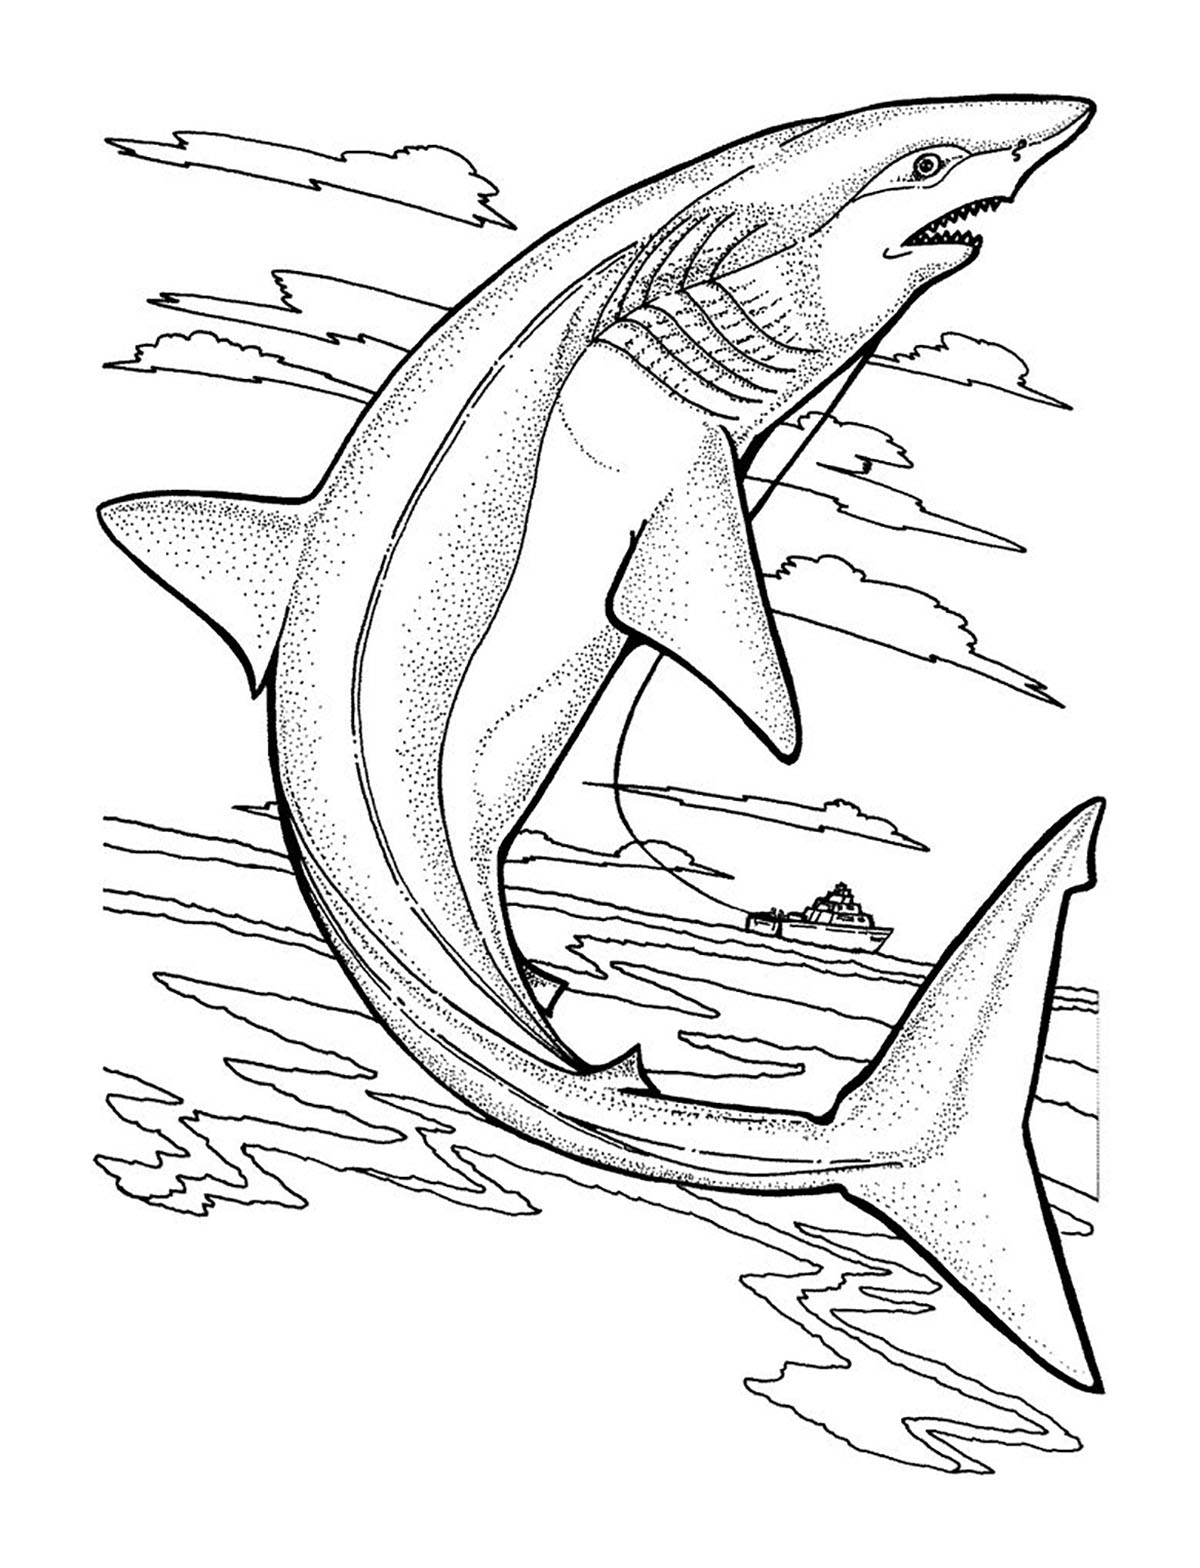 Sharks to print for free - Sharks Kids Coloring Pages